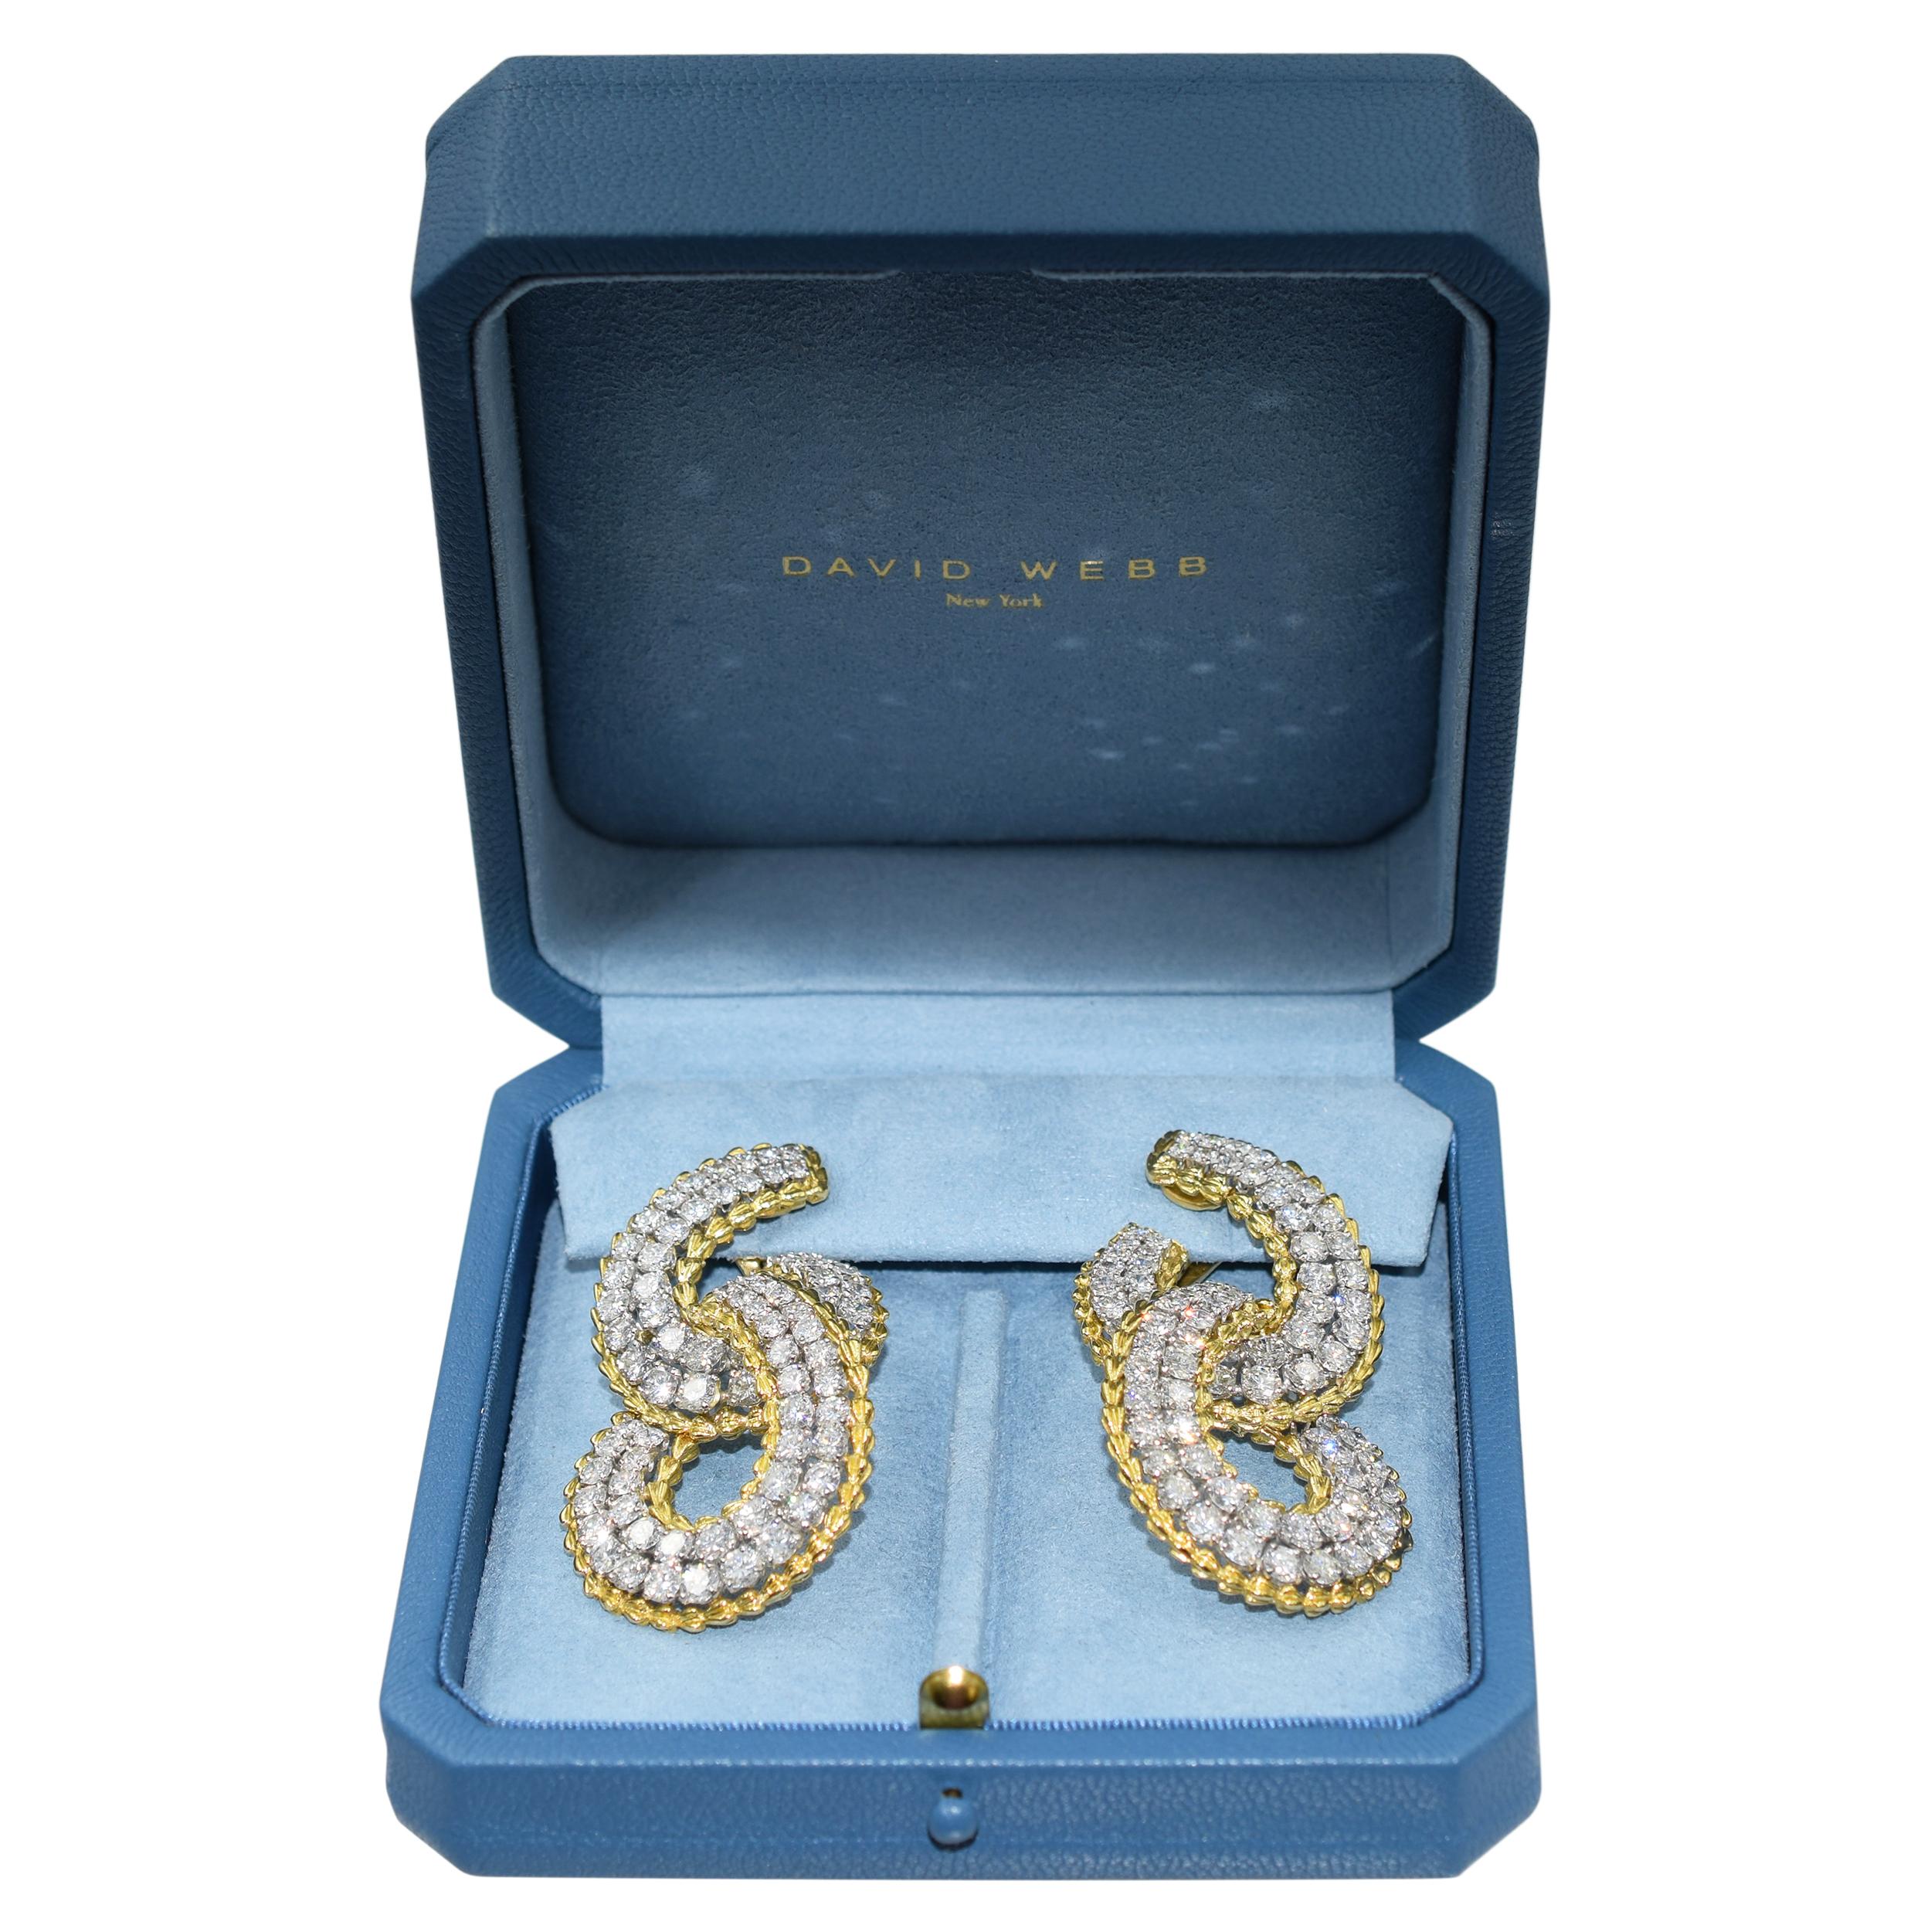 David Webb diamond drop earrings crafted in 18k yellow gold and platinum.
Each of these earrings consists of two loops connected together. Center of the loops set with two rows of diamonds accelerating in size, prong set in platinum, accented by